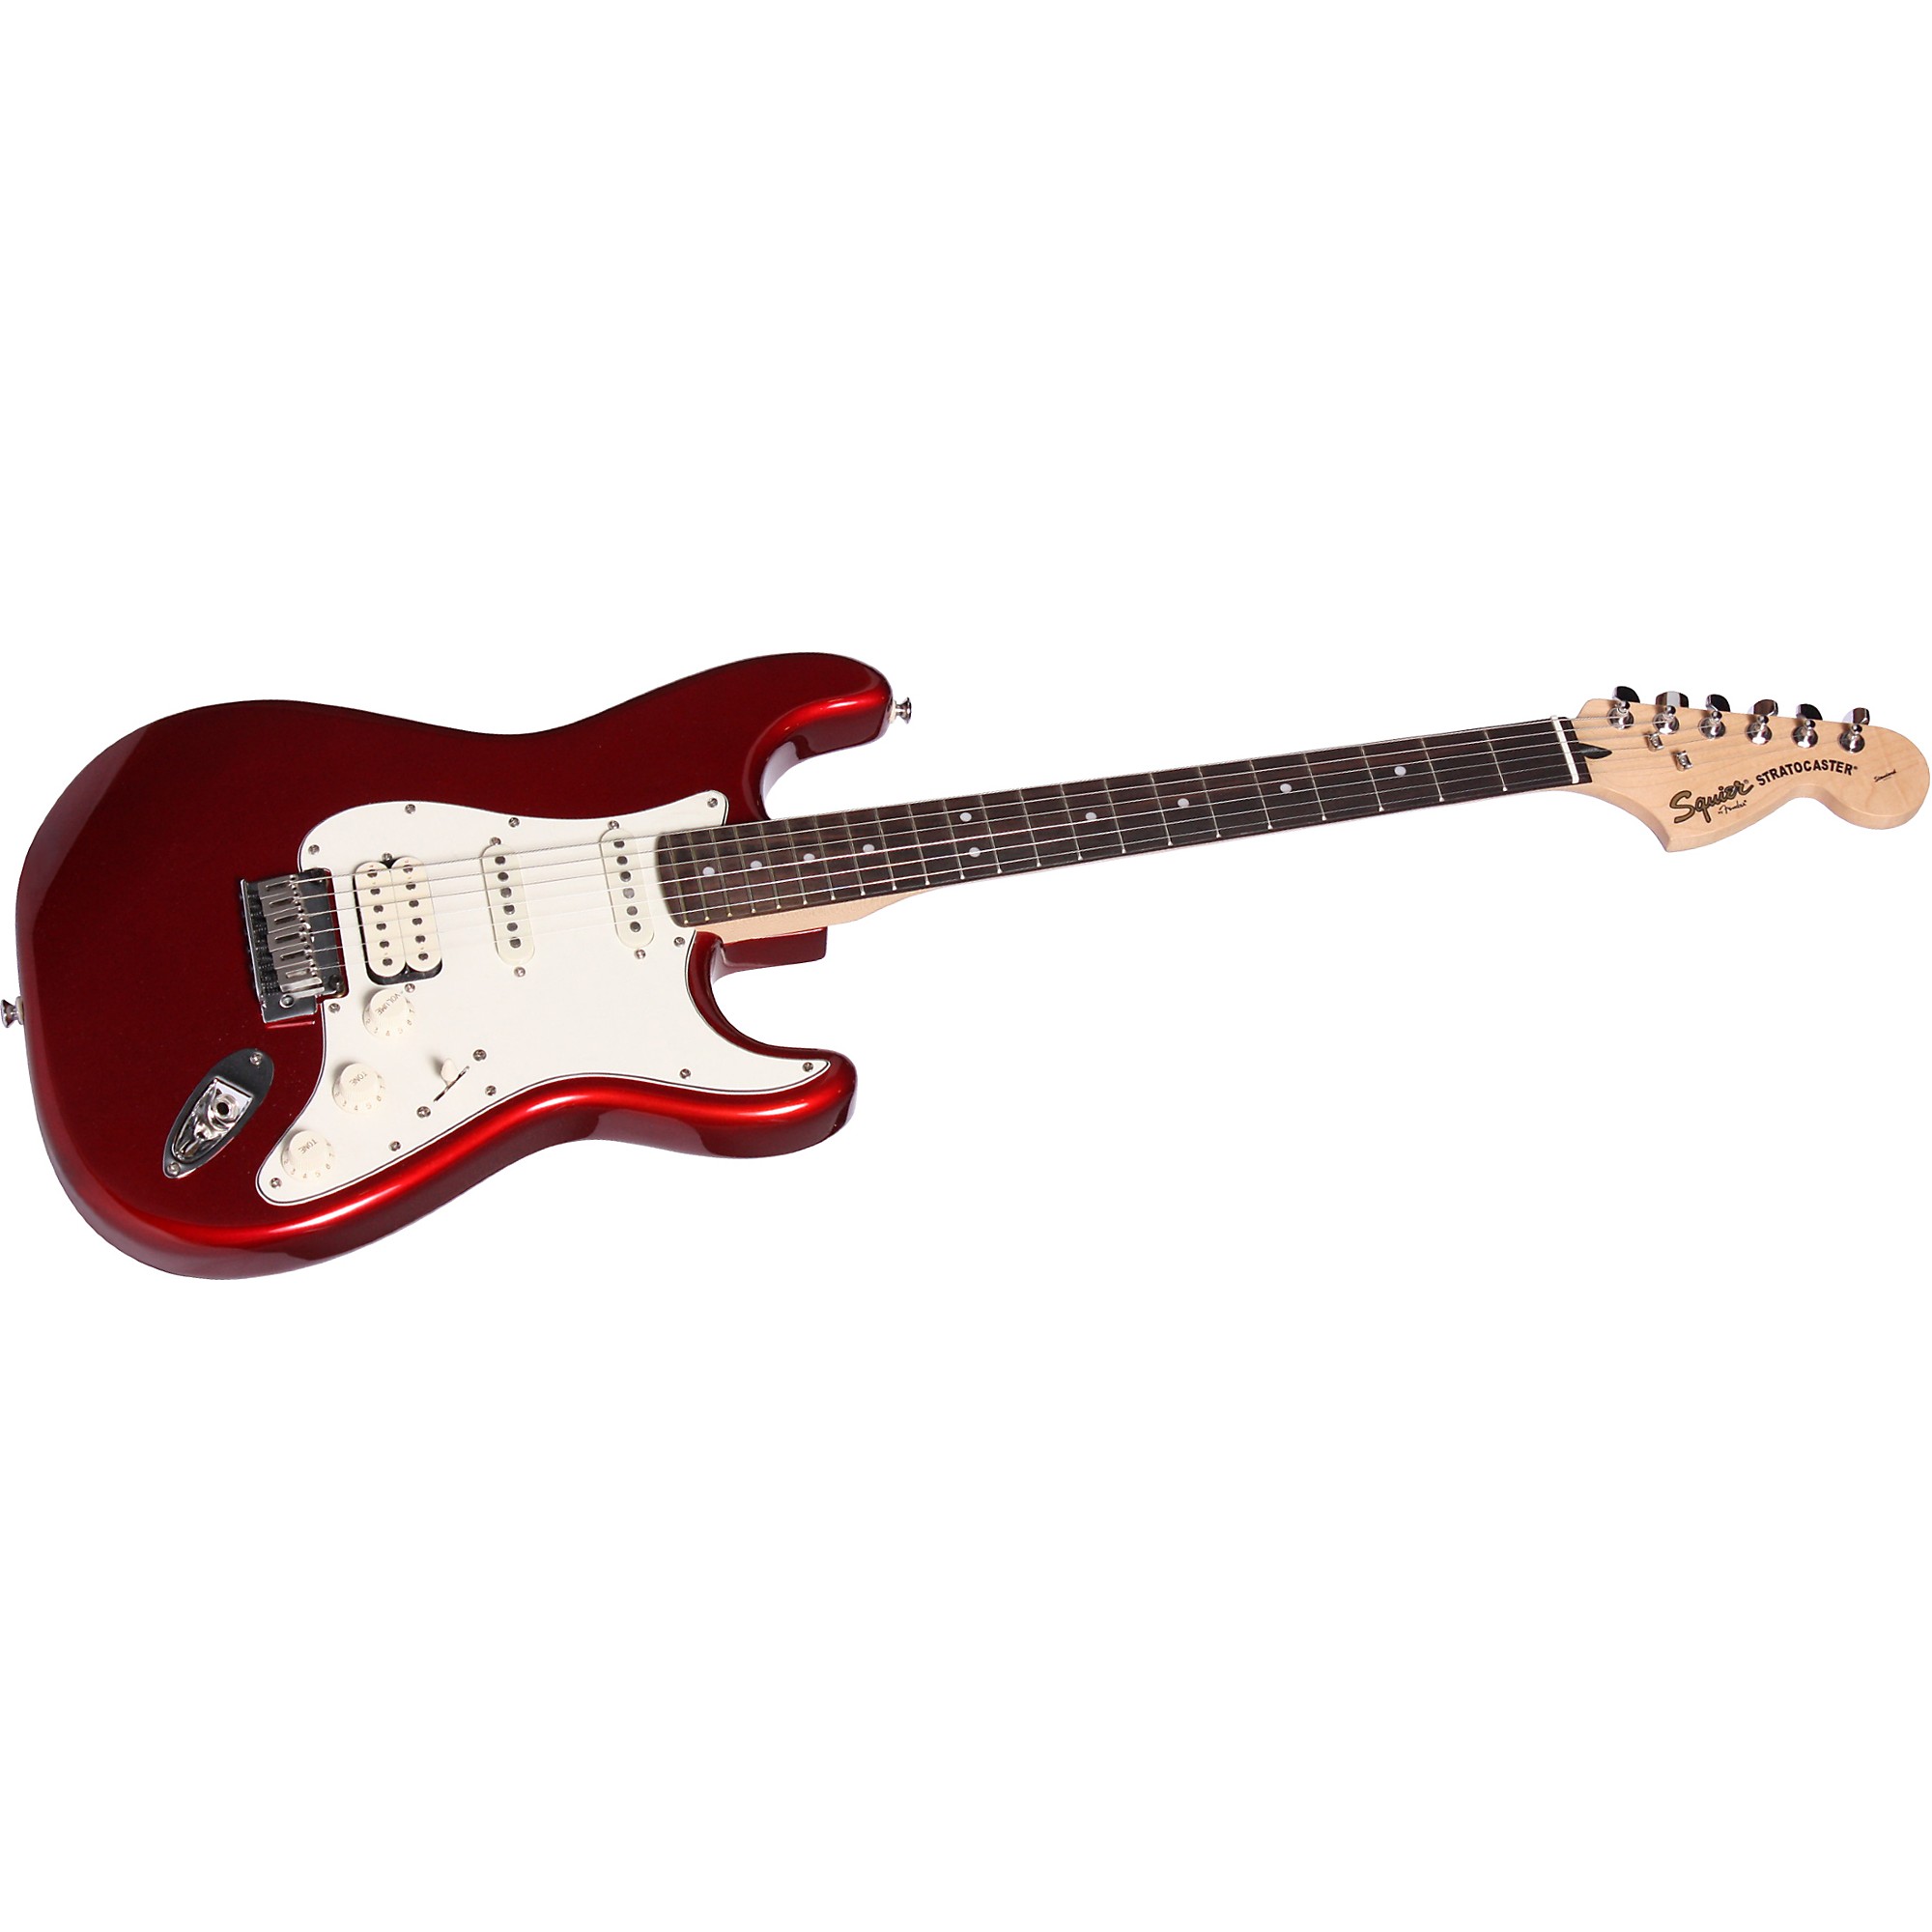 Squier Series Stratocaster HSS Electric Guitar Candy Apple Red |